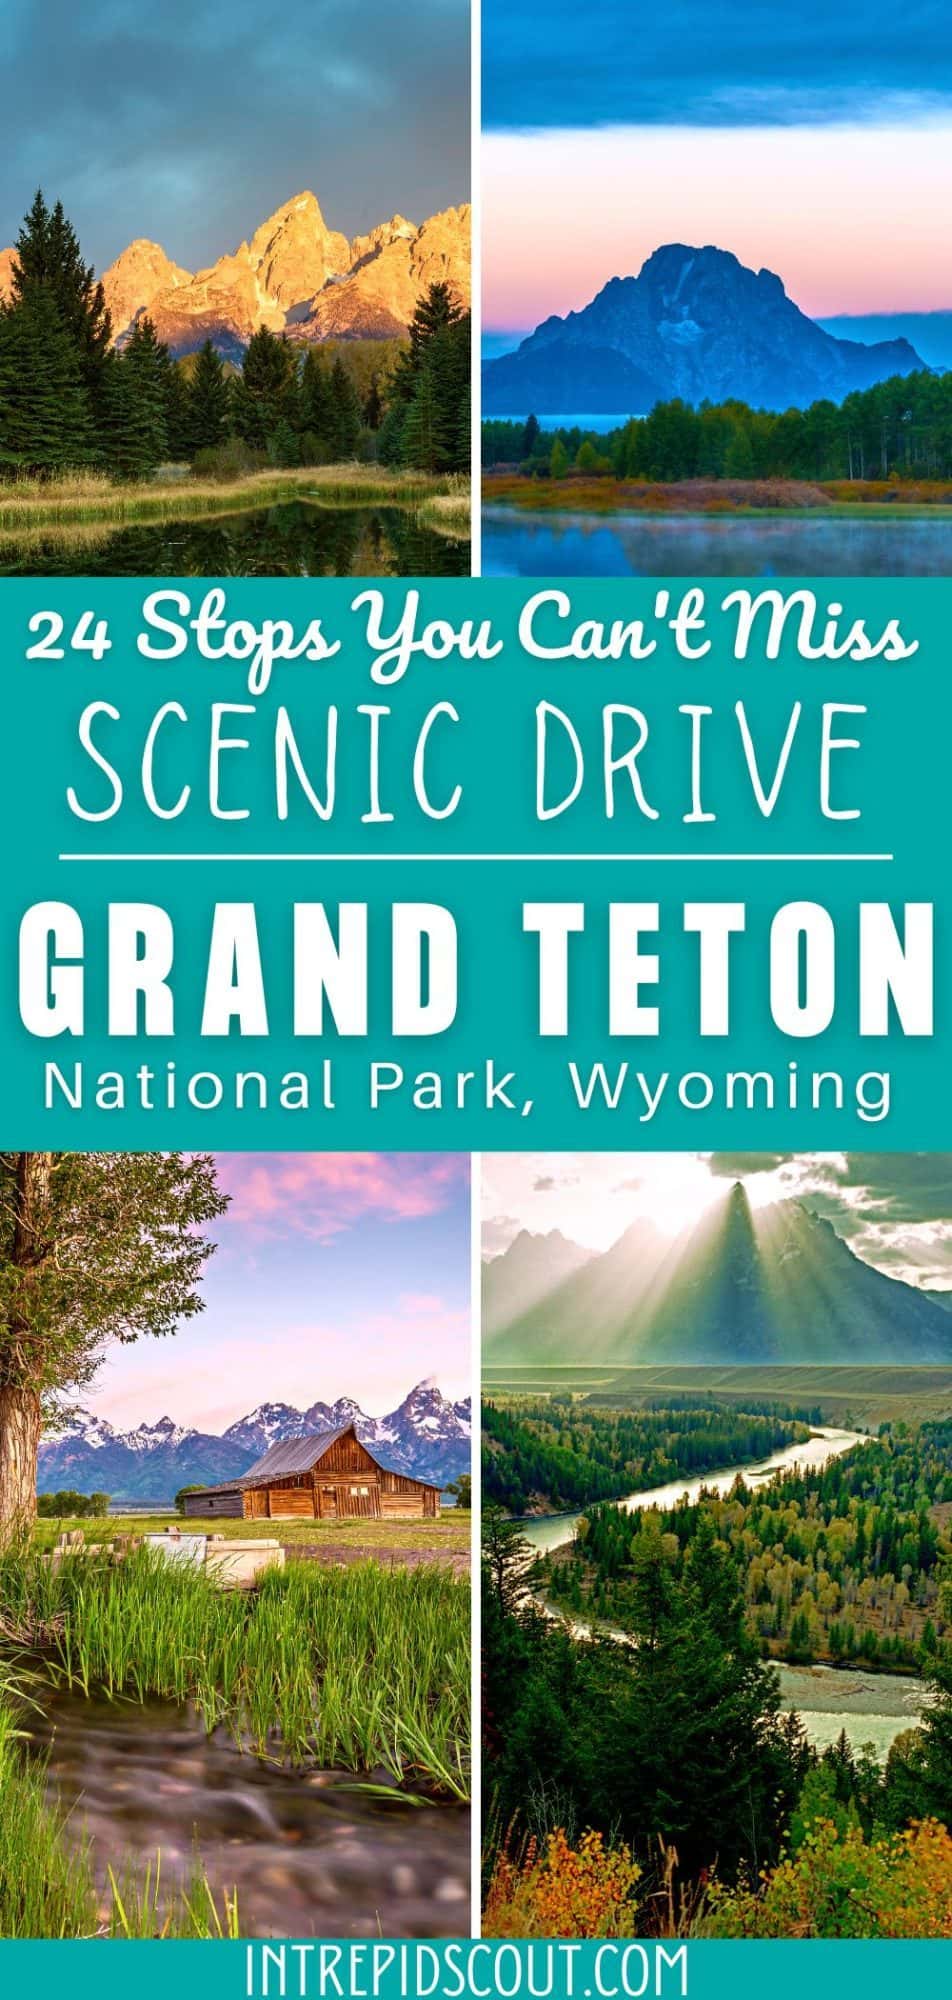 42-Mile SCENIC LOOP DRIVE in GRAND TETON (24 Stops You Can't Miss ...